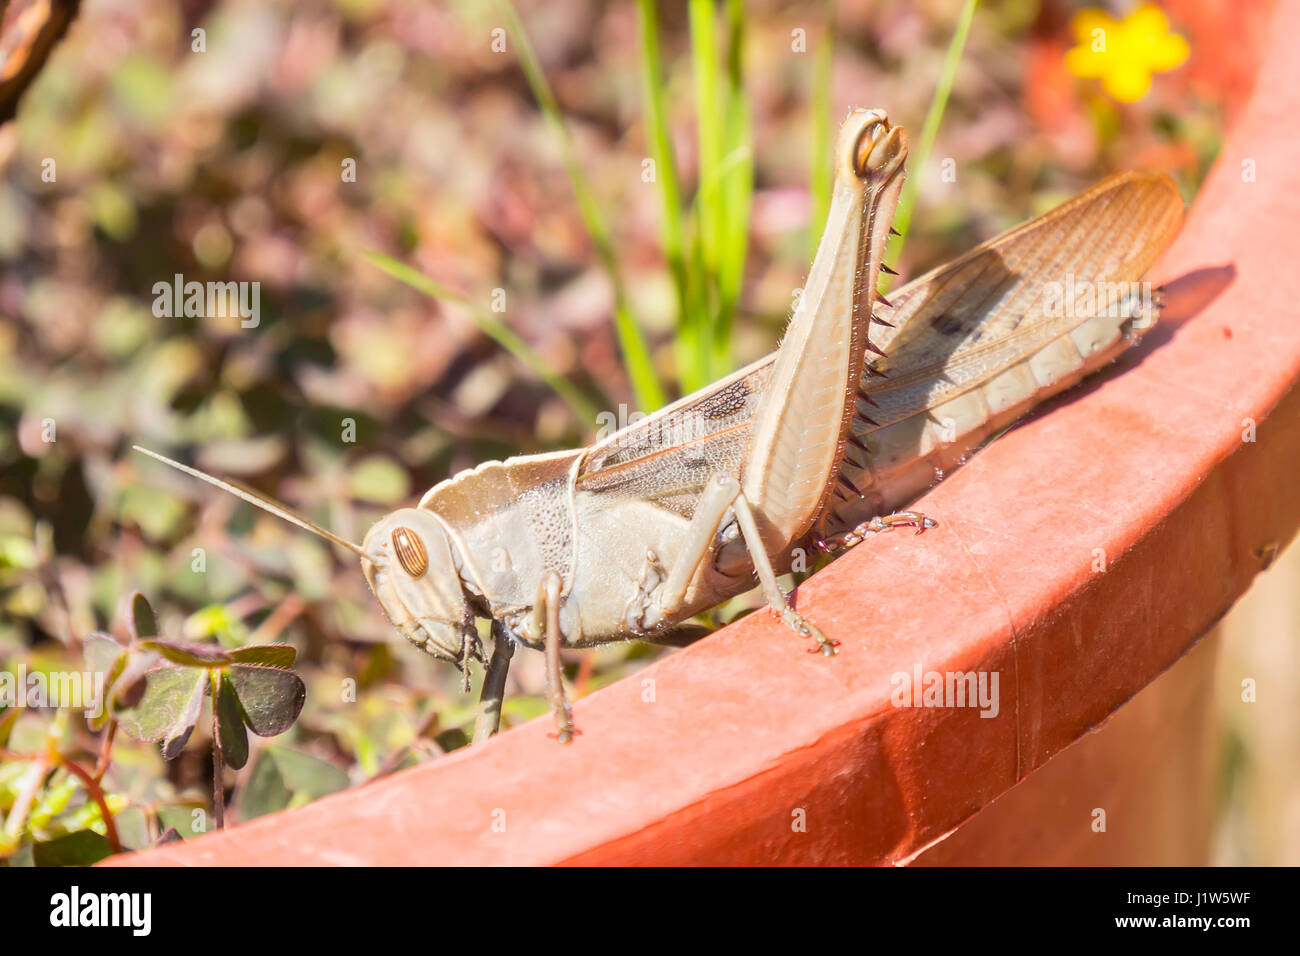 Acanthacris ruficornis grasshopper on the edge of a pot Stock Photo